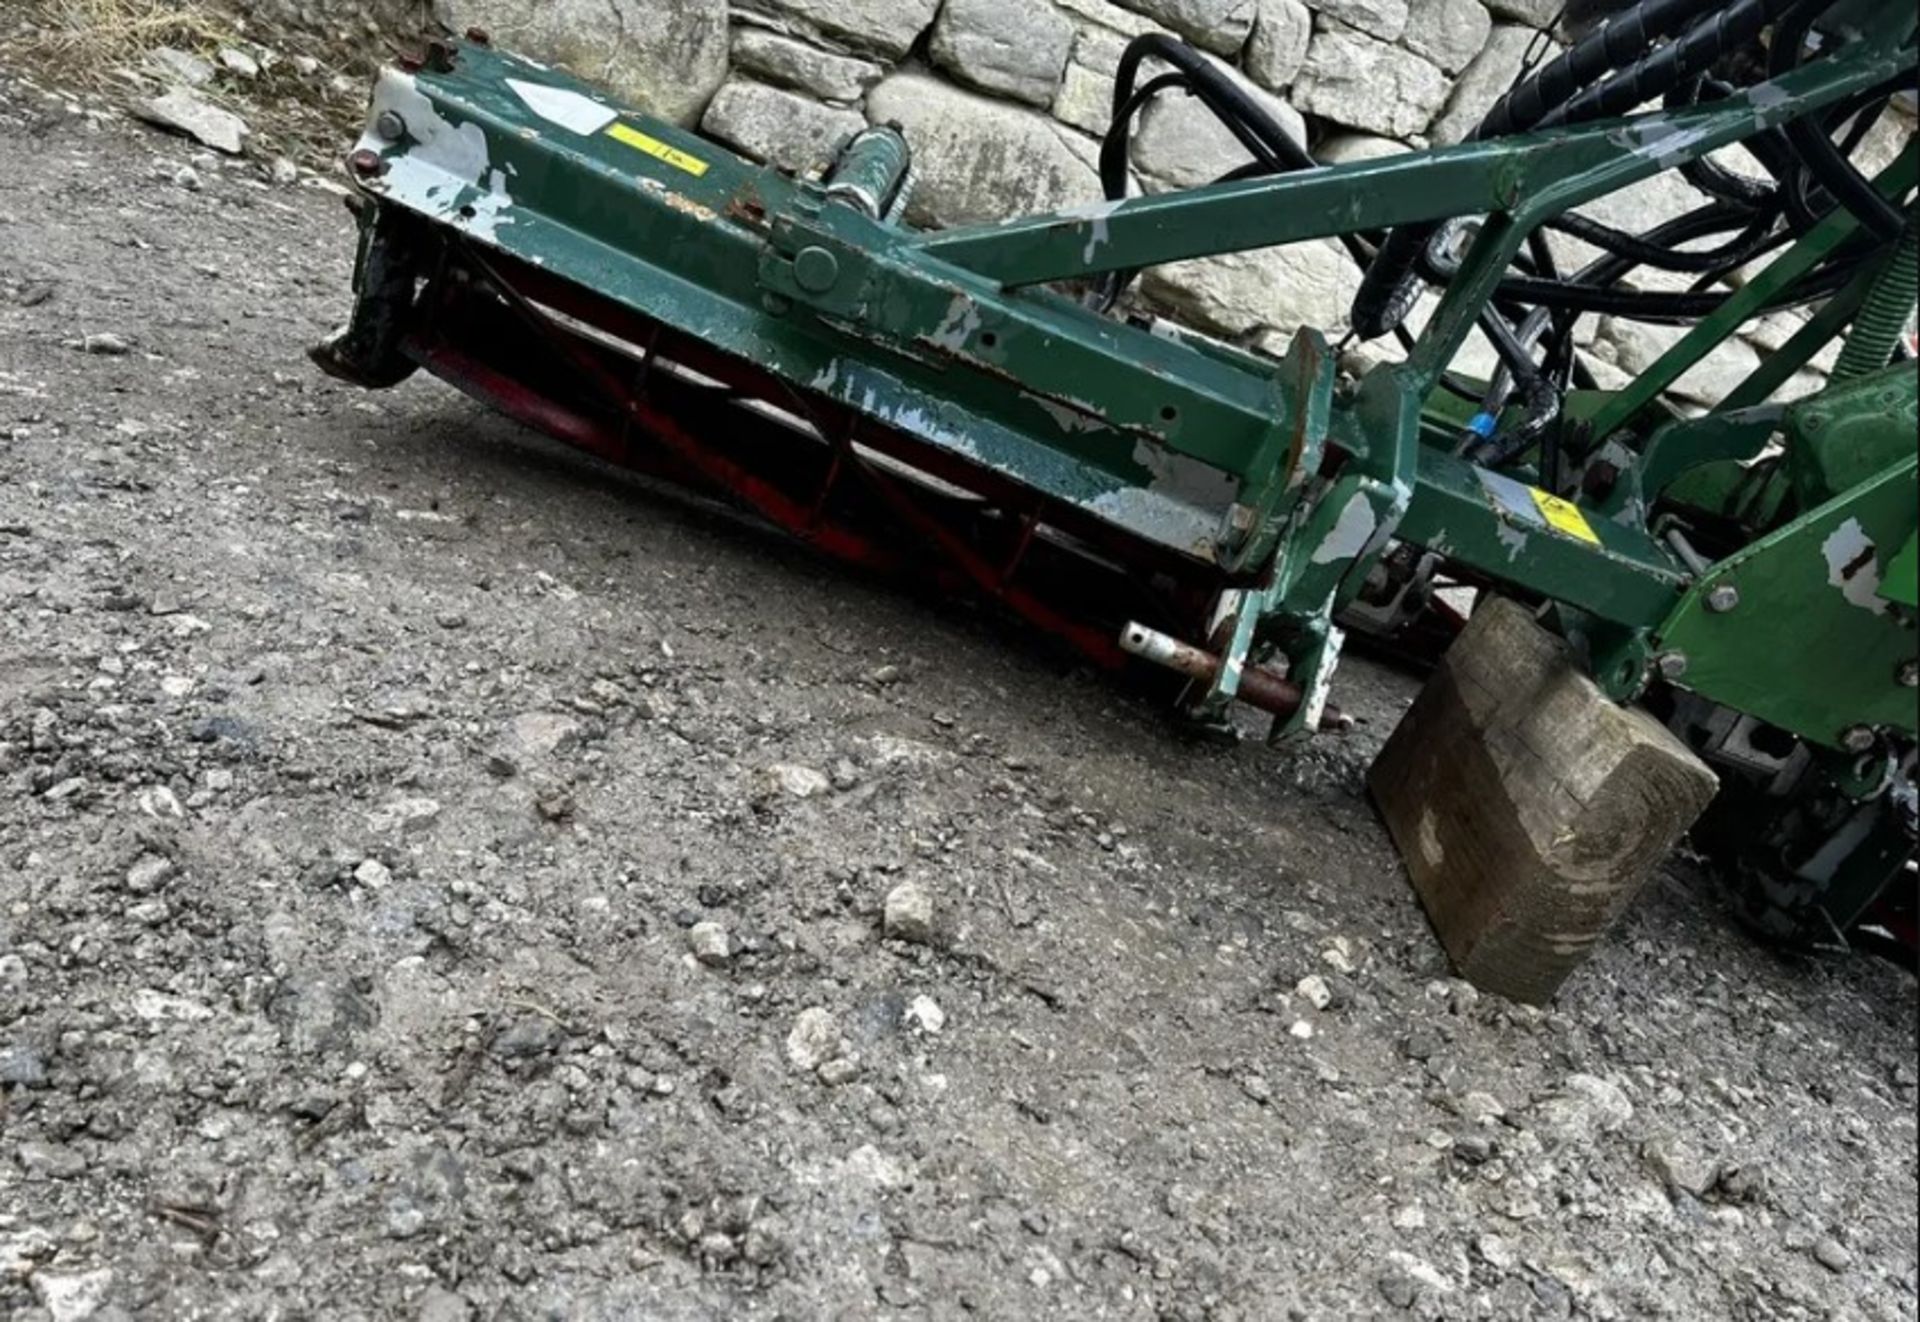 RANSOMES MOUNTED 214 GANG MOWER - PROFESSIONAL GRADE GRASS CUTTER - Image 3 of 6